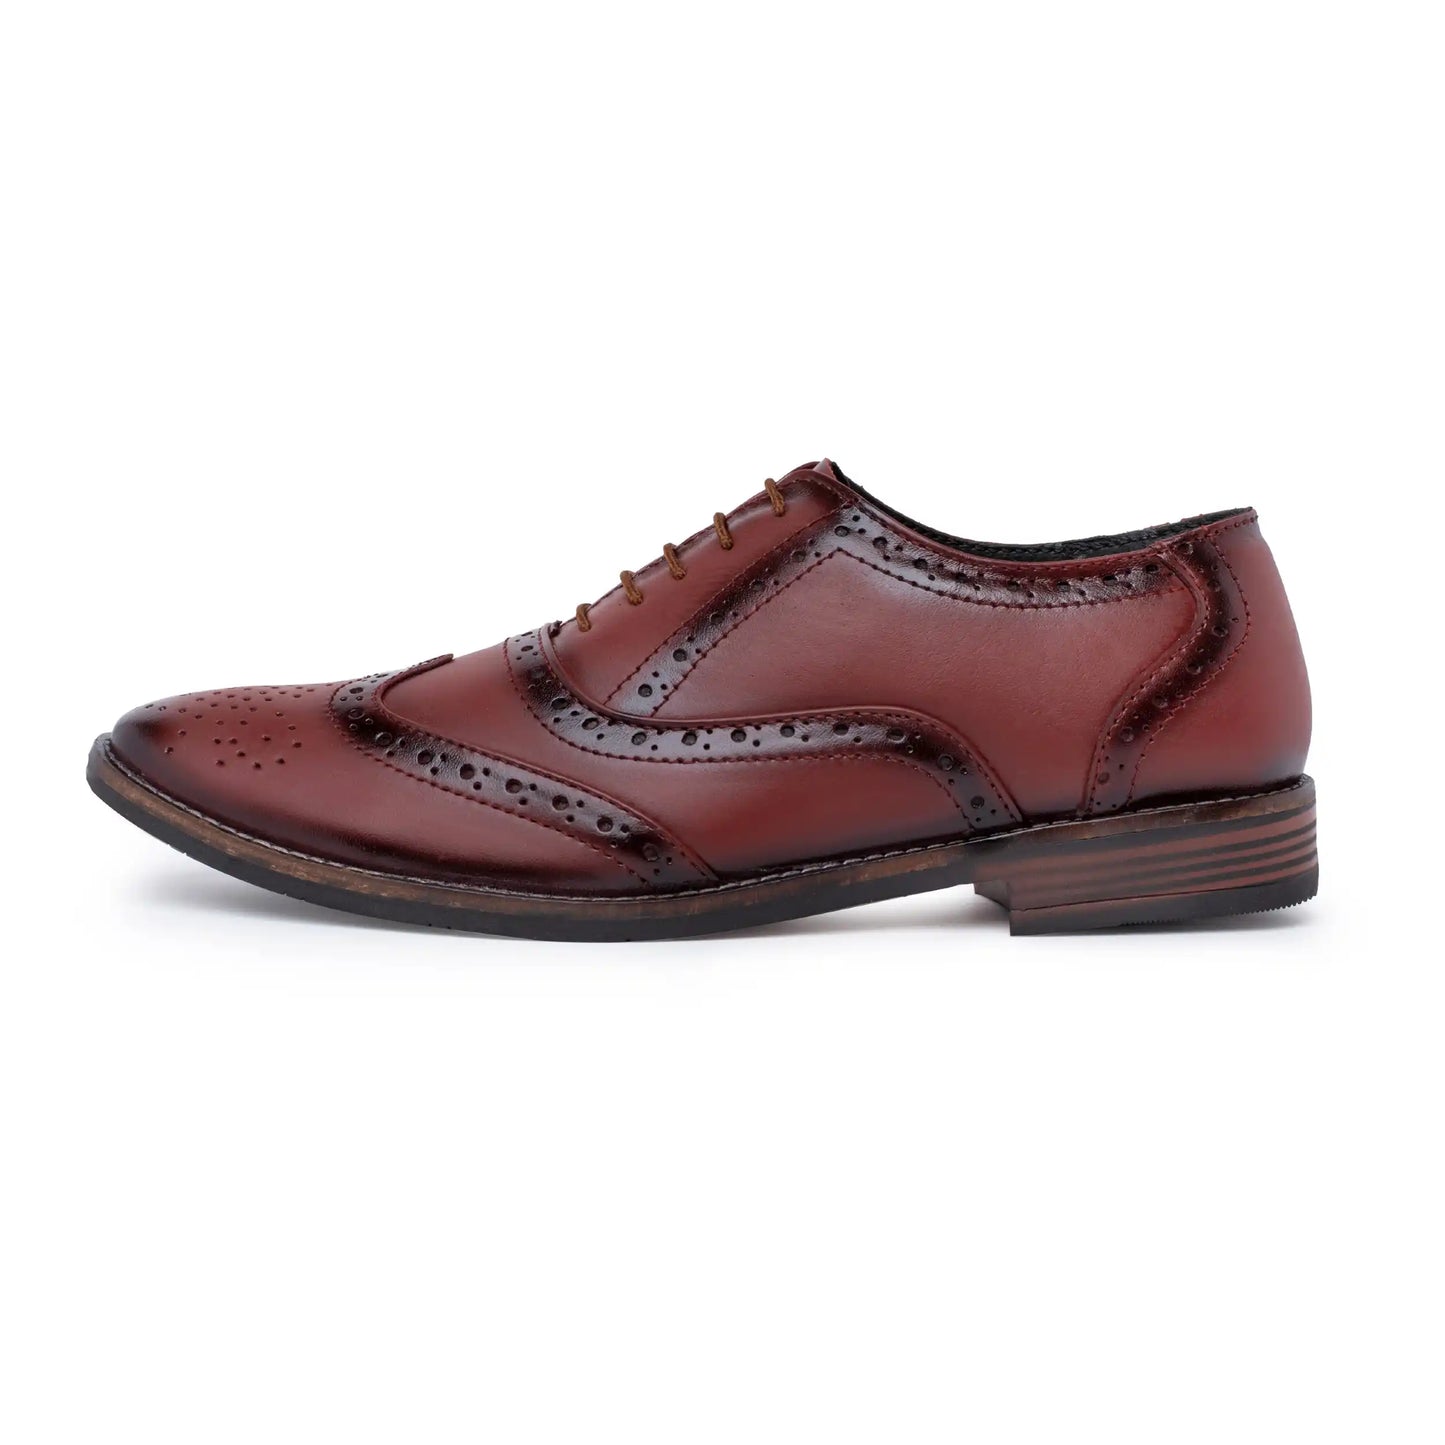 Men Pure Leather WingTip Oxford Brogue Shoes